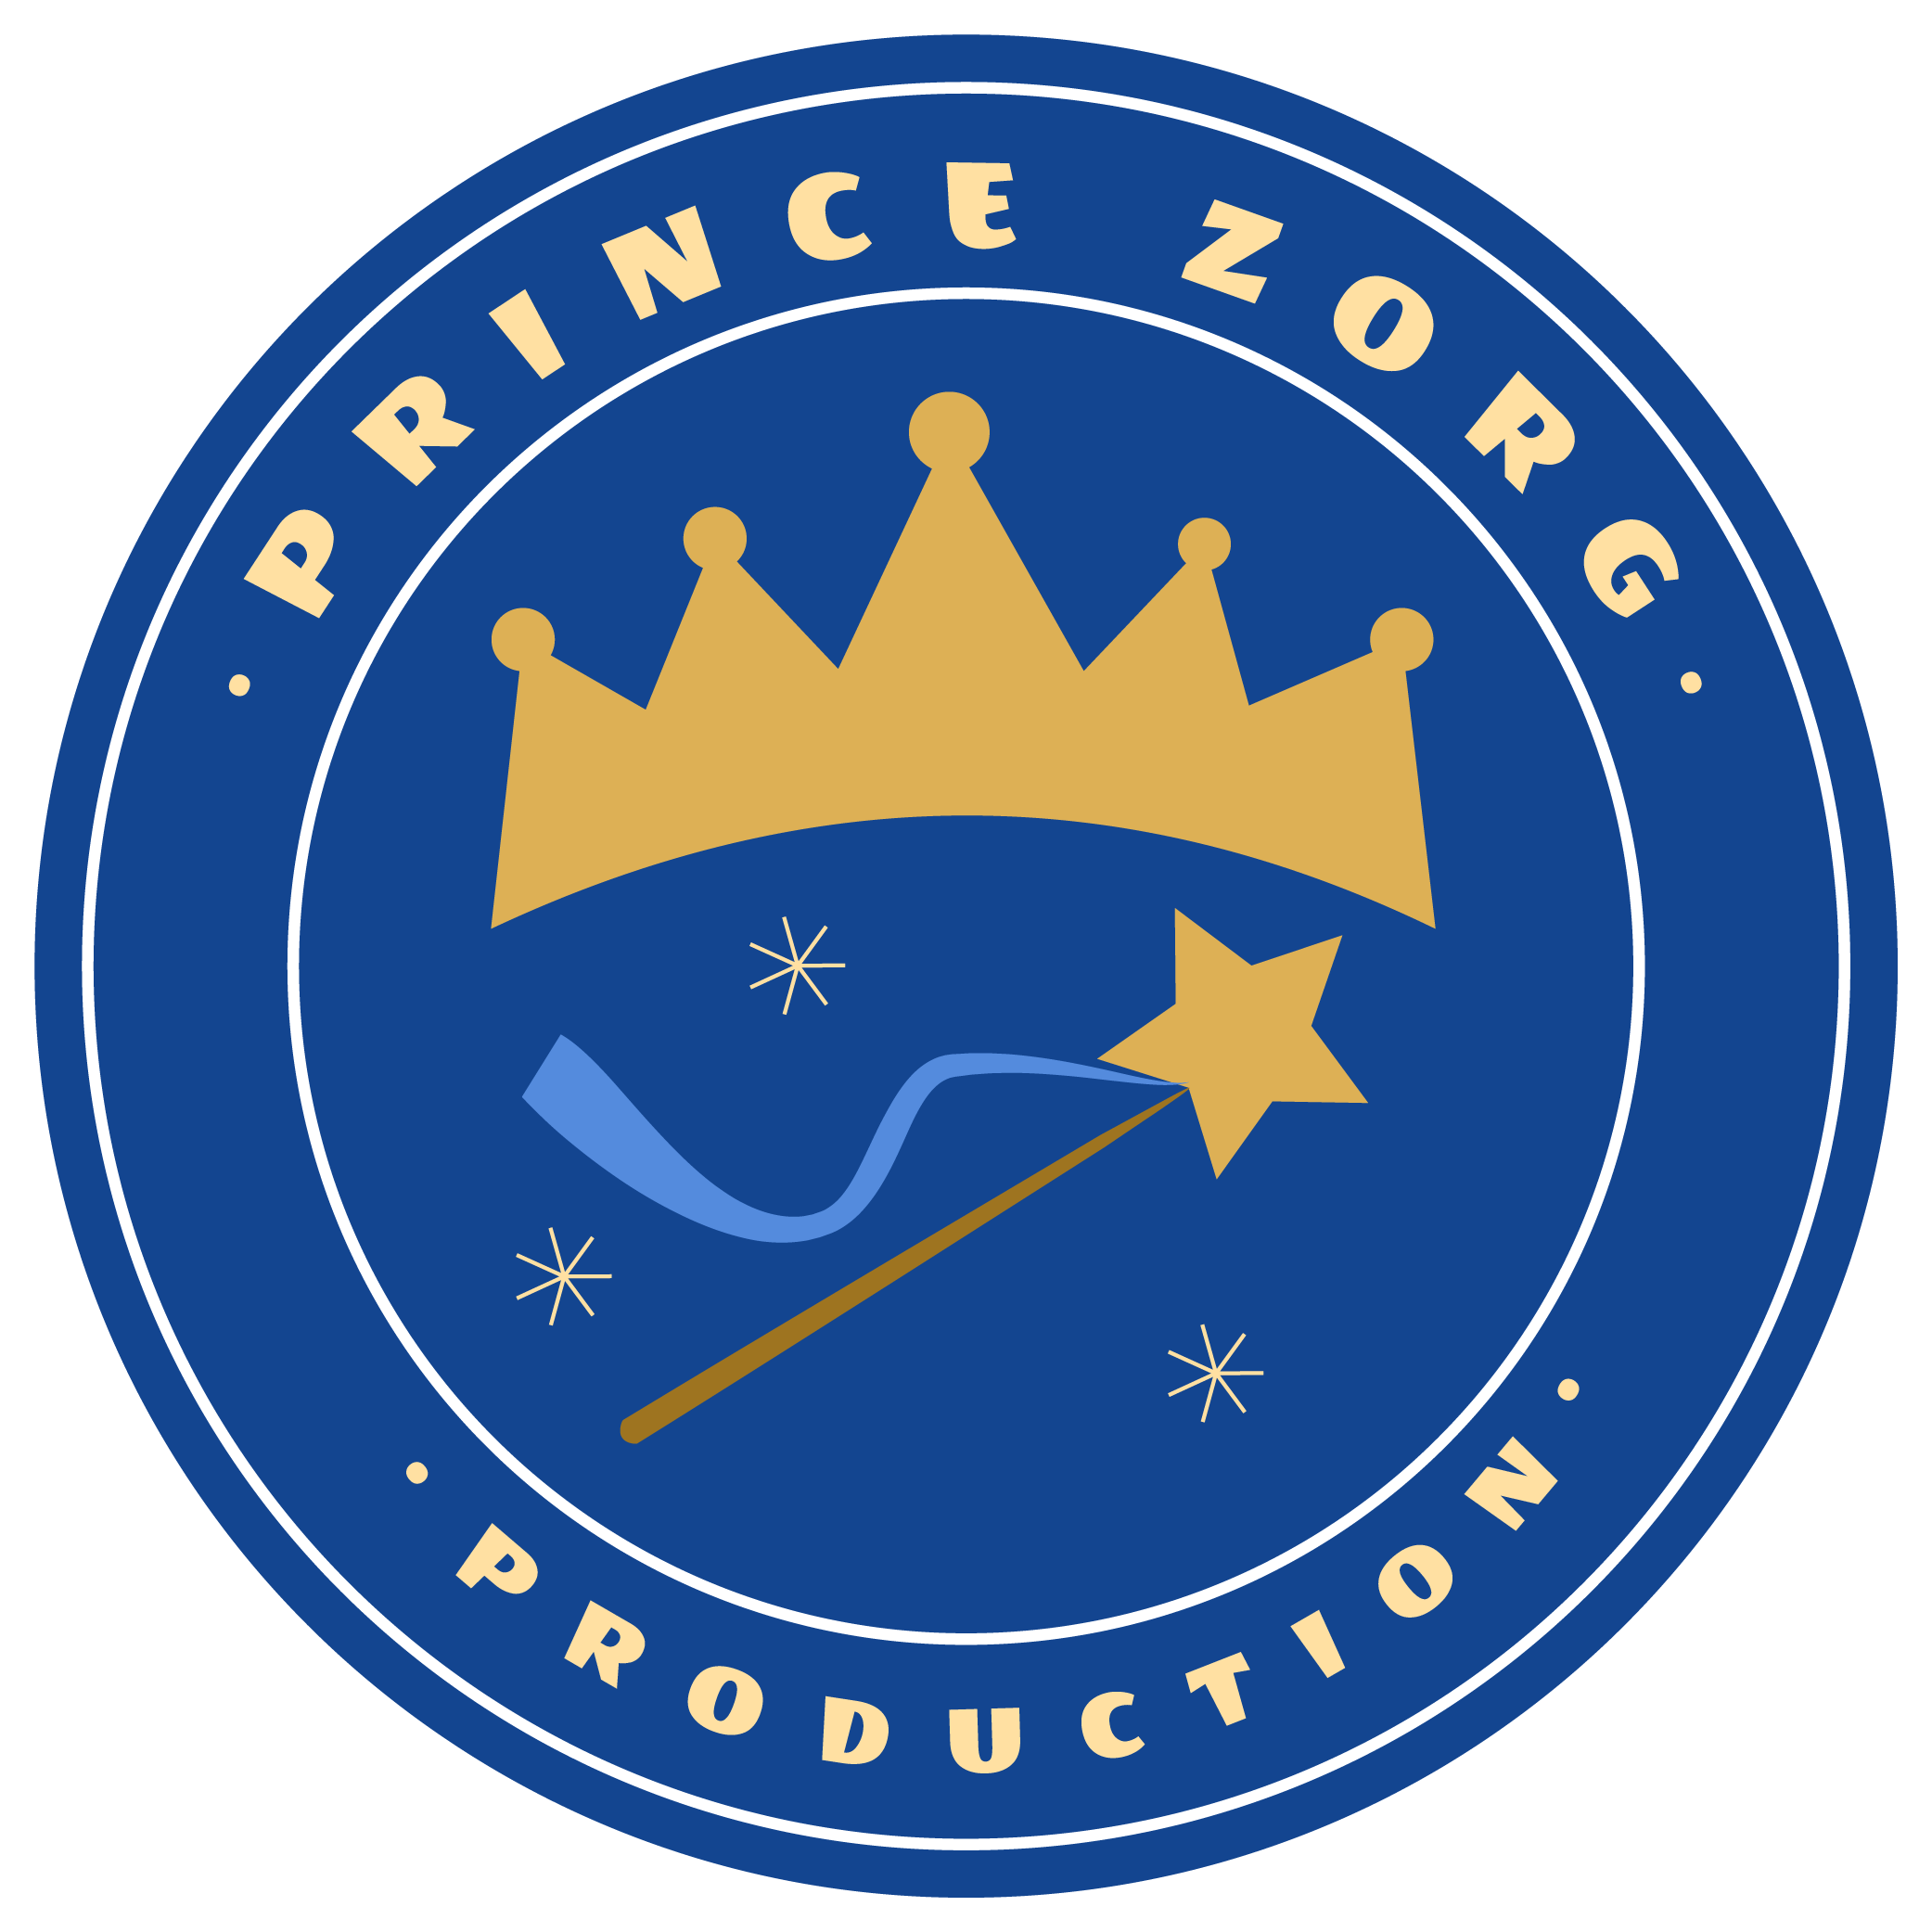 Prince Zorg Production